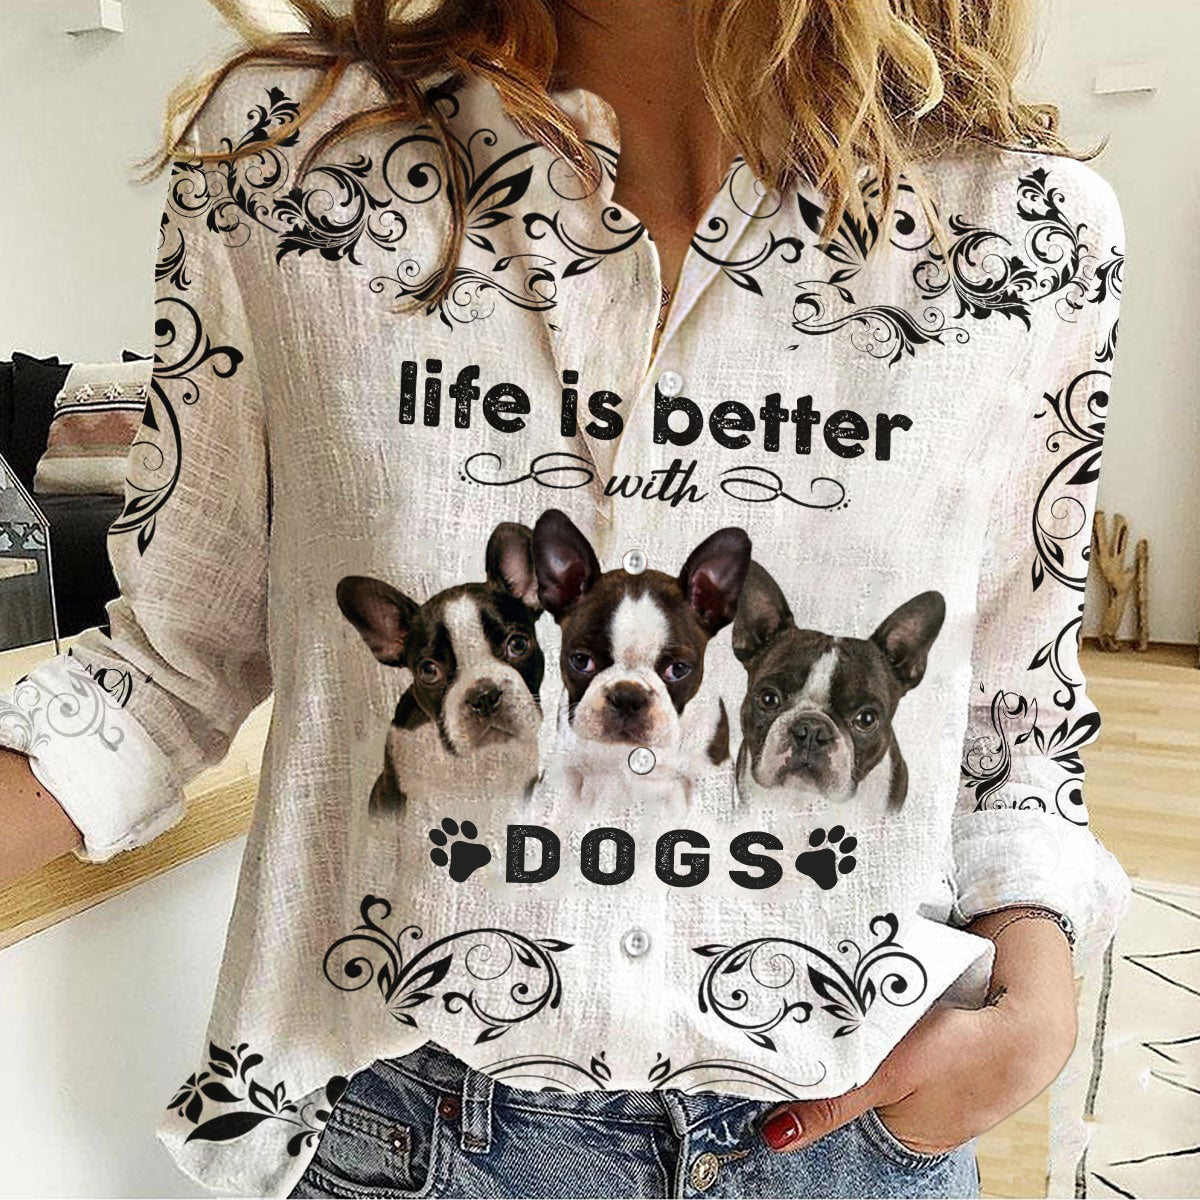 Boston Terrier-Life Is Better With Dogs Women's Long-Sleeve Shirt